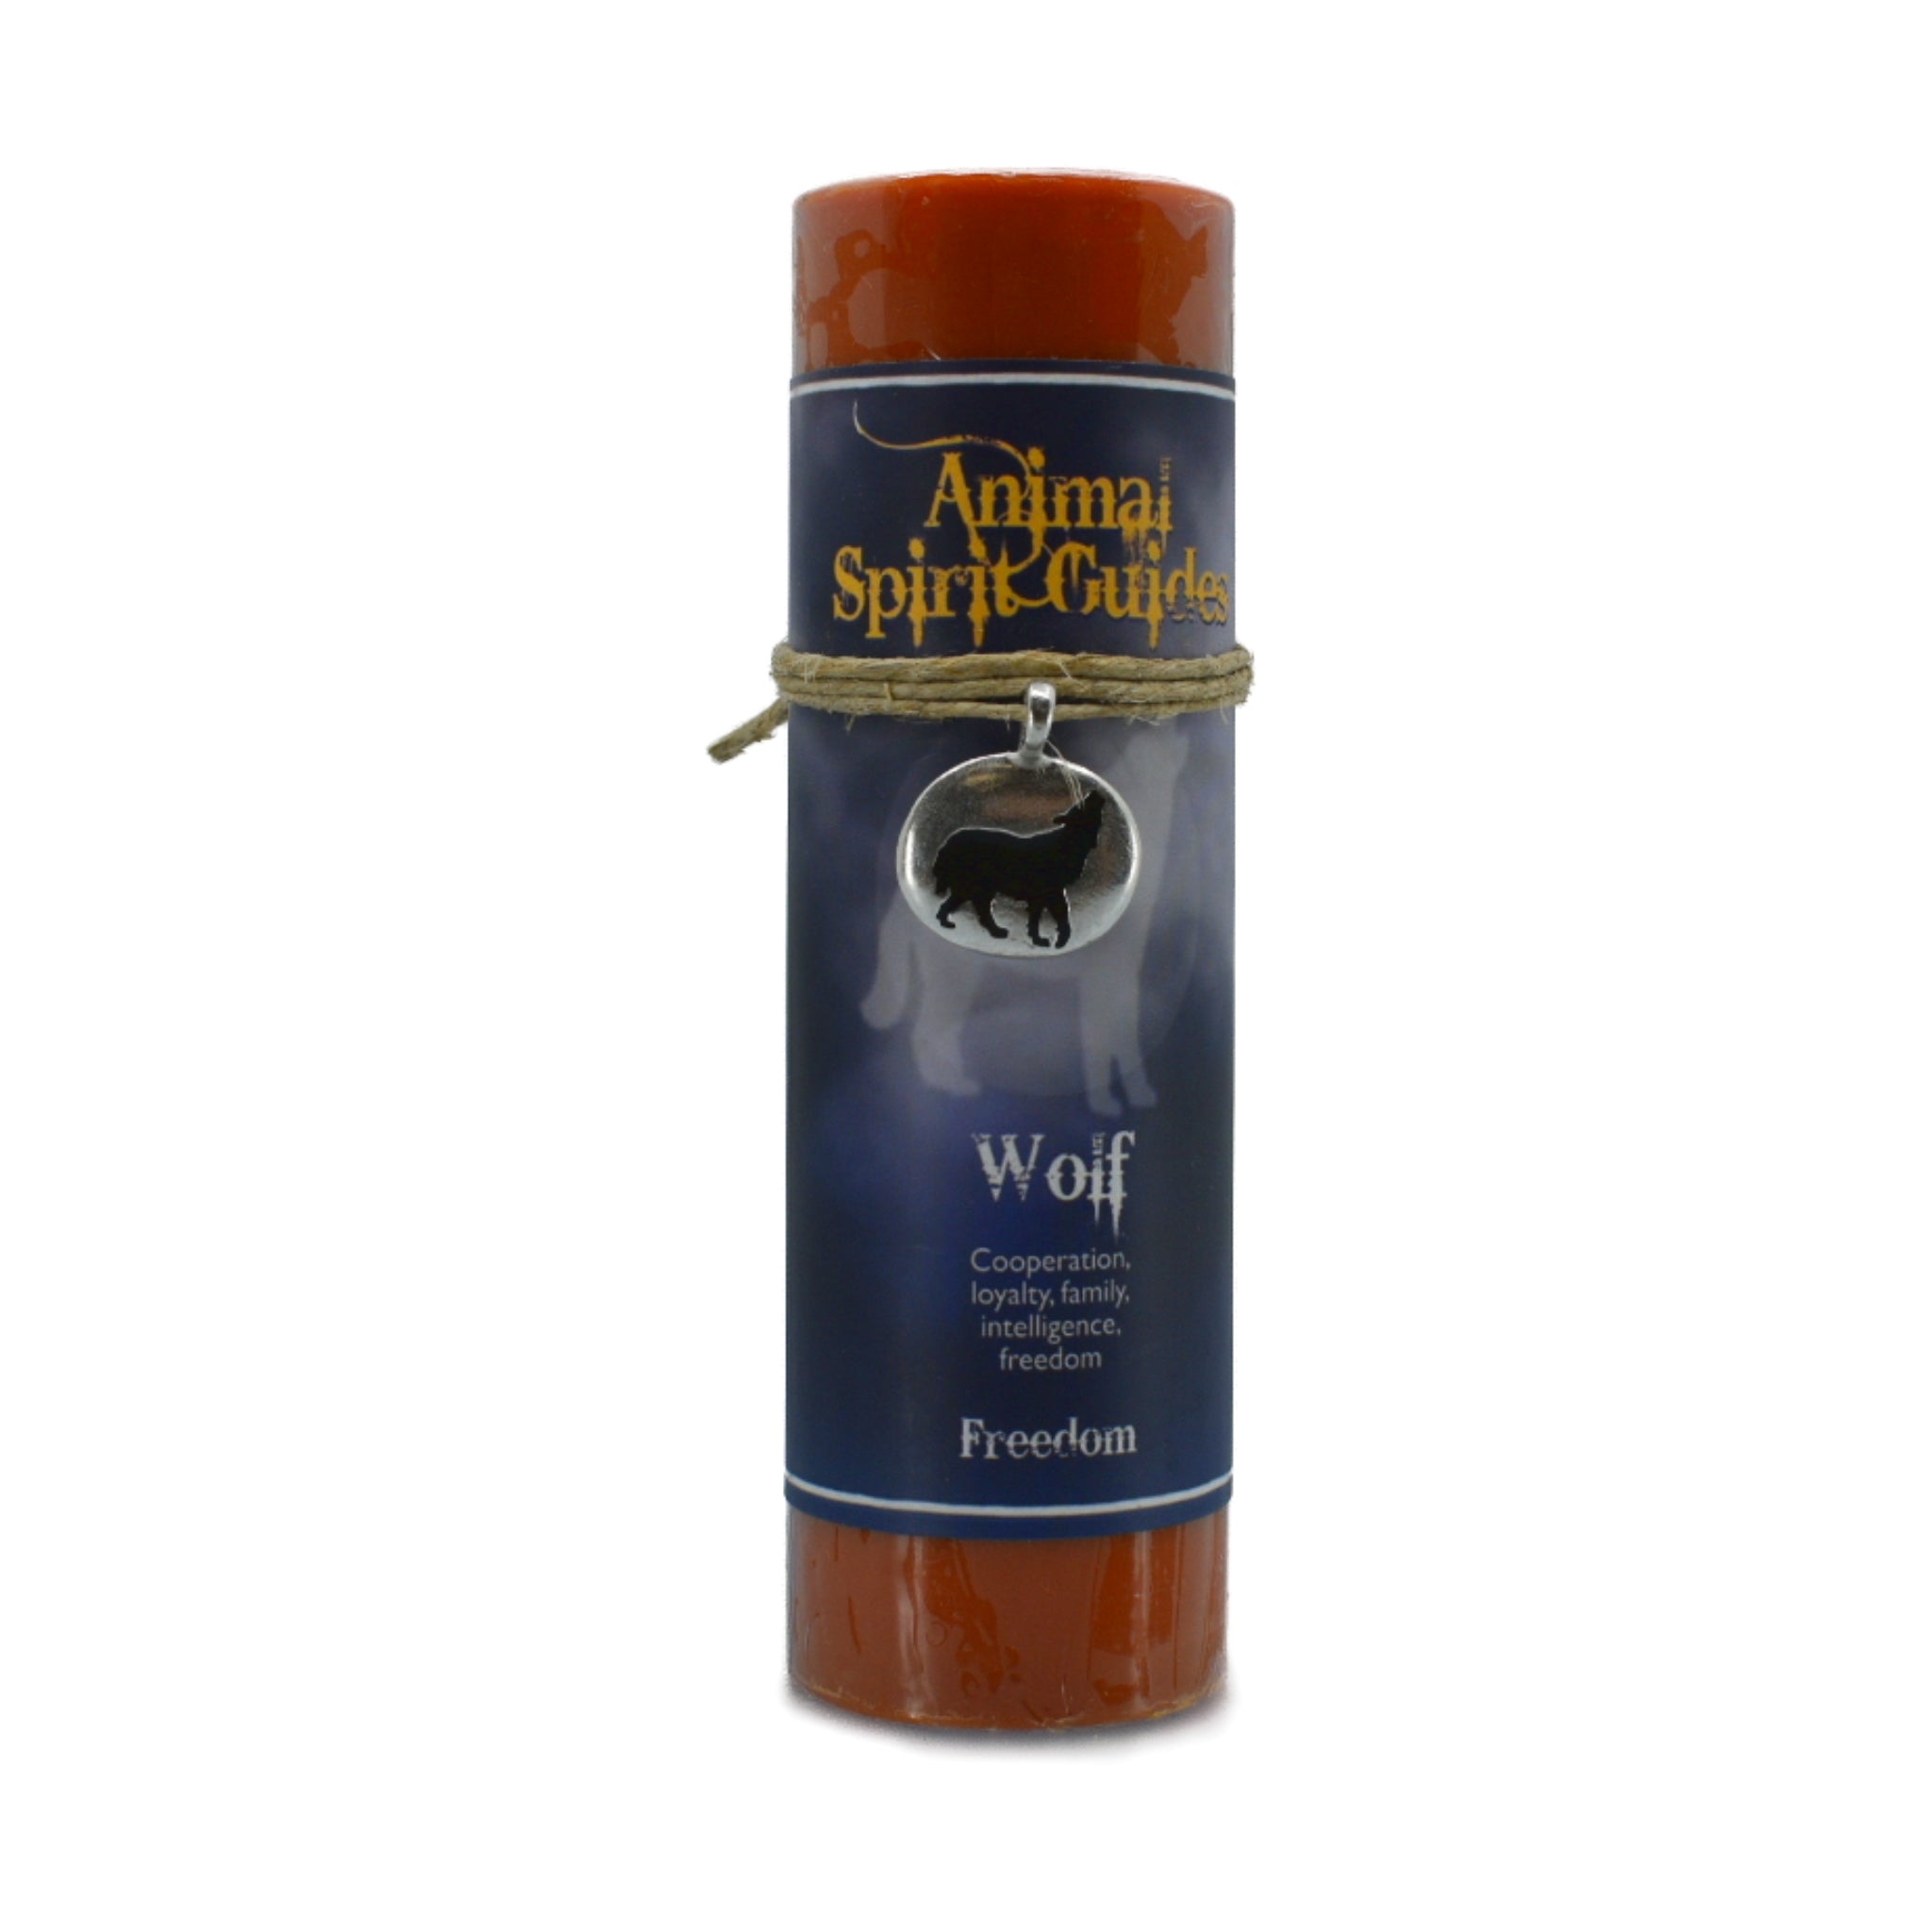 Wolf Animal Spirit Pendant Candle.  This lead free pewter pendant has a black impression of a wolf walking which is attached to an orange candle.  The pendant can be worn as a necklace  or used as an amulet.  The wolf  symbolizes freedom, cooperation, loyalty, family and intelligence. 